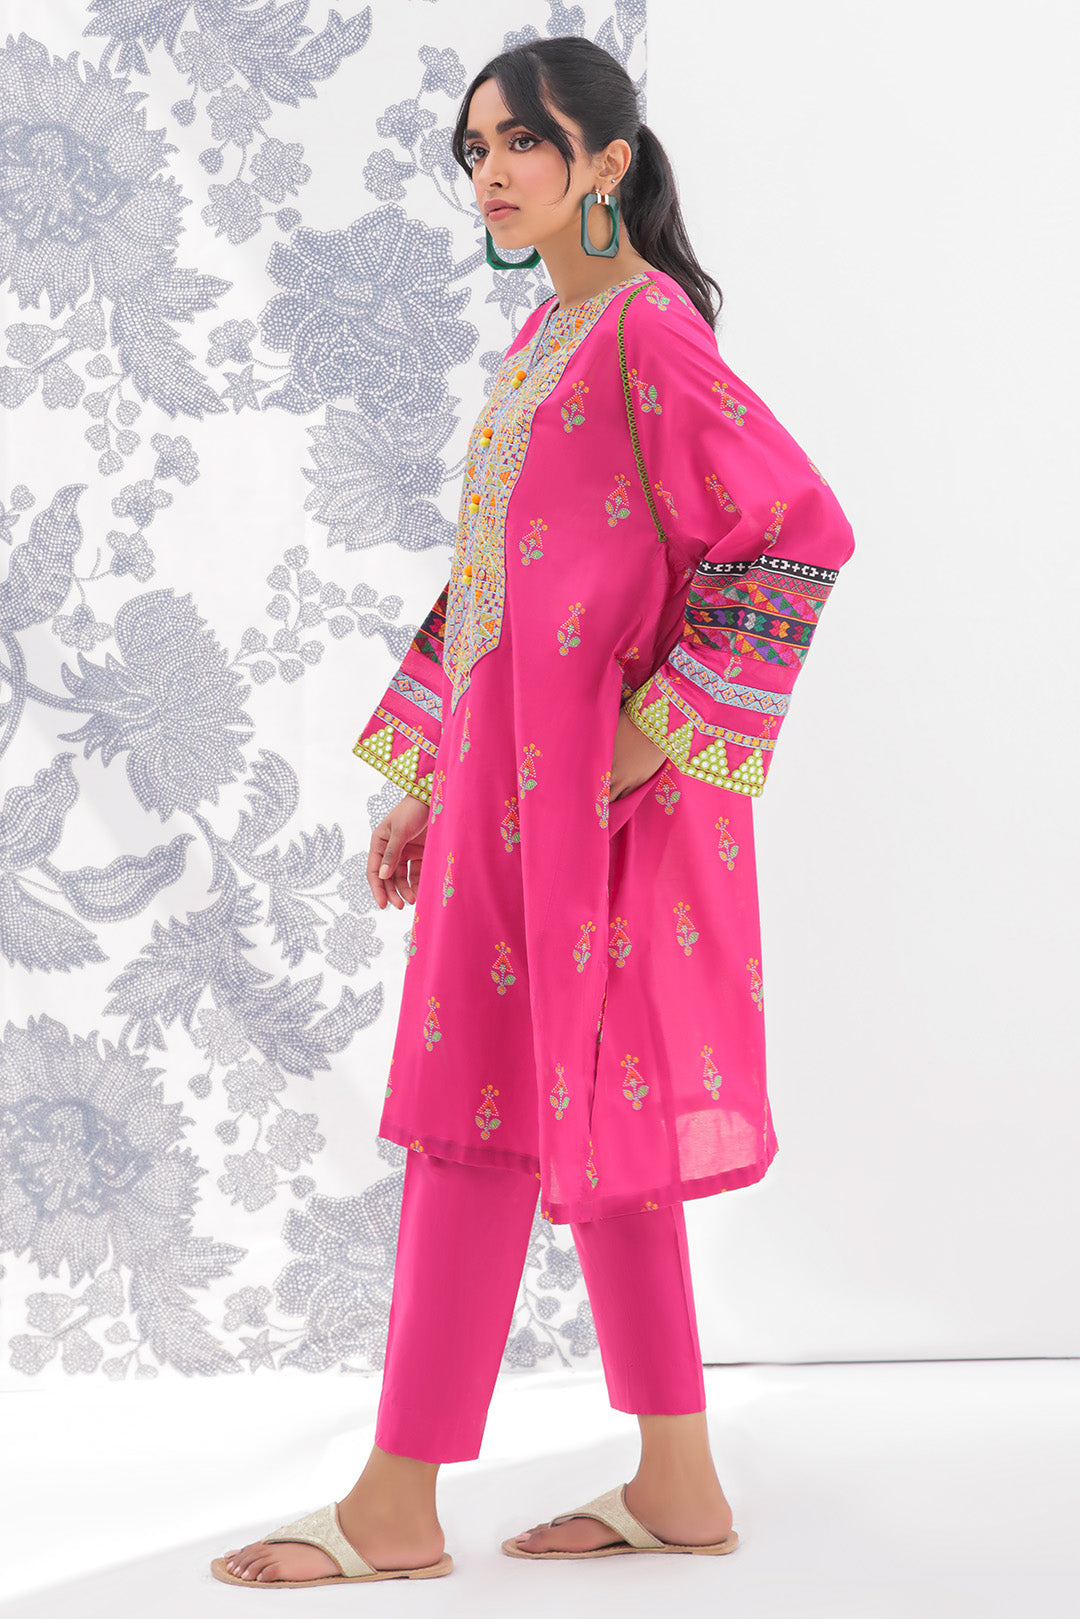 1 Piece - Embroidered Digital Printed Lawn Shirt P0435 (SO)